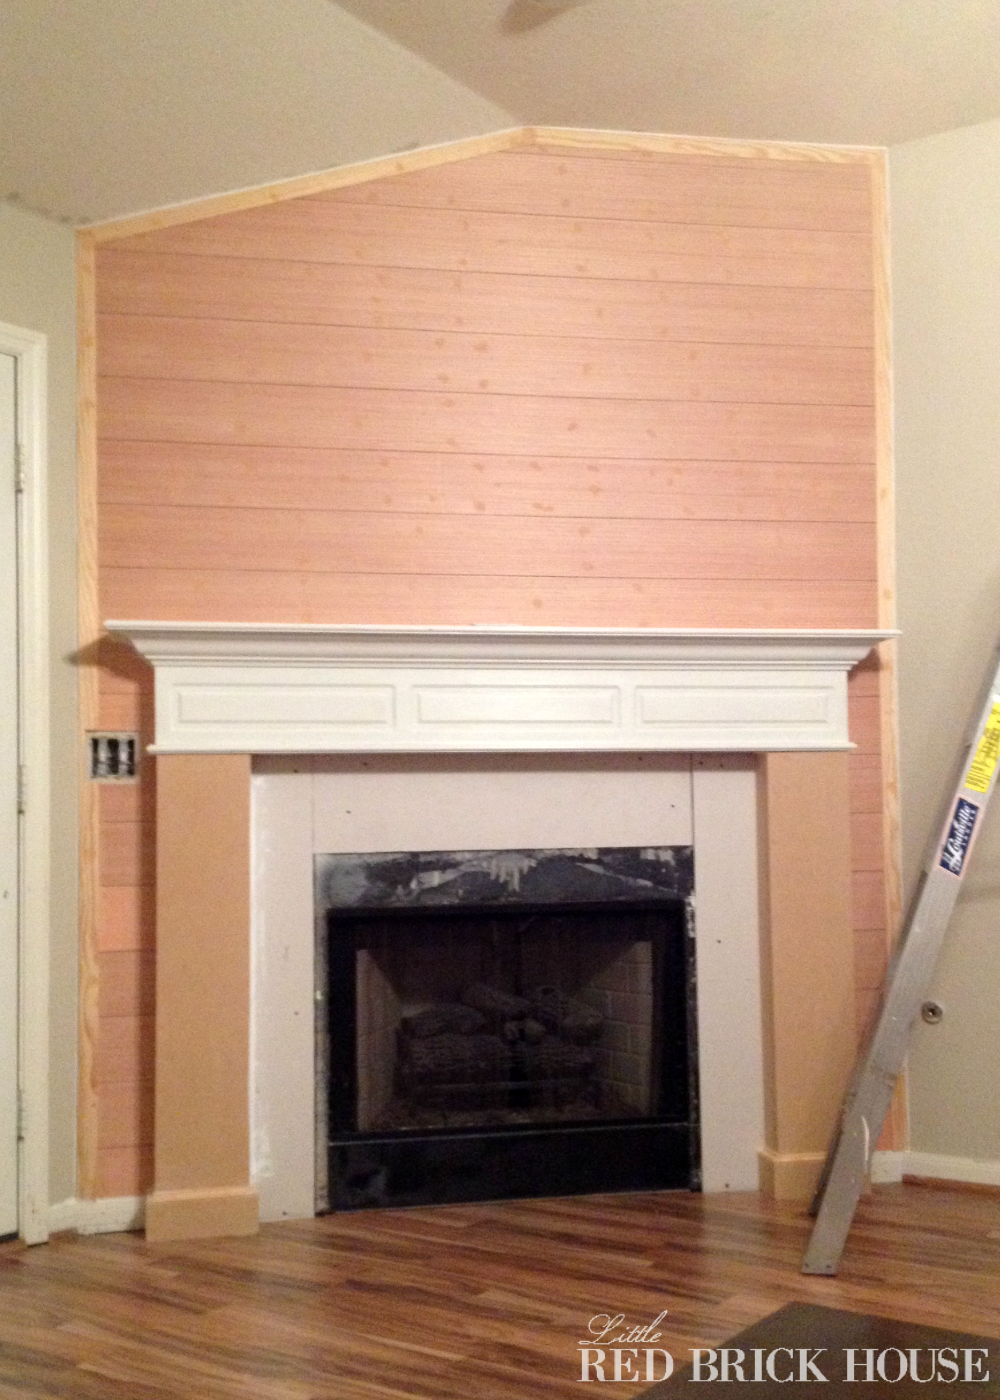 Fireplace Makeover: Planked Wall Tutorial